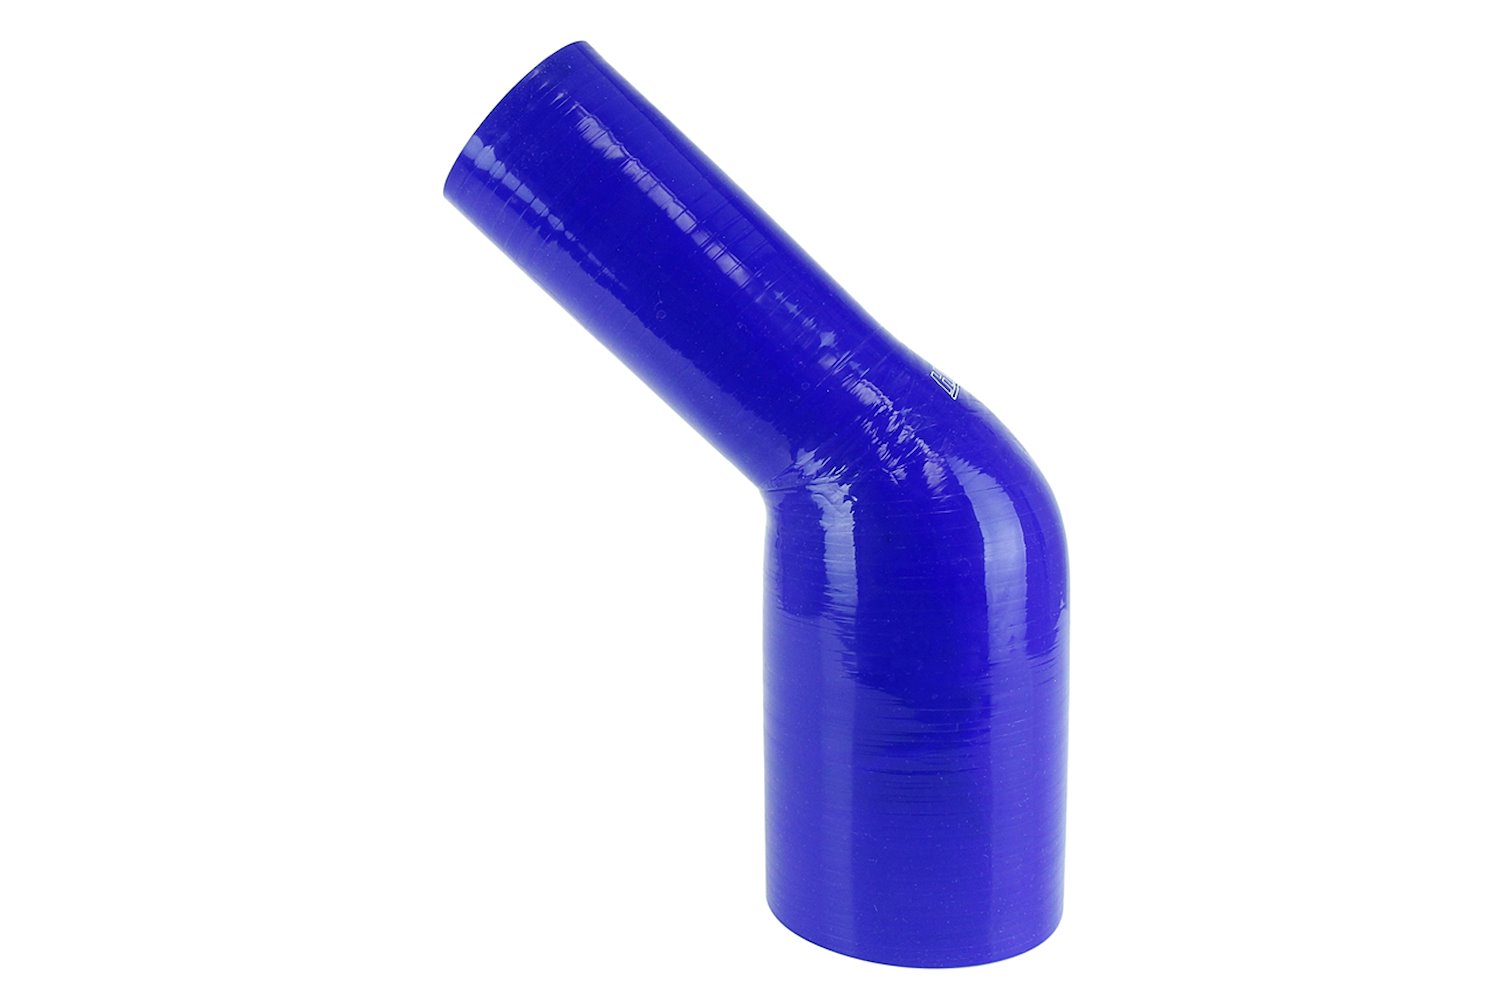 HTSER45-200-300-BLUE Silicone 45-Degree Elbow Hose, High-Temp 4-Ply Reinforced, 2 in. - 3 in. ID, Blue